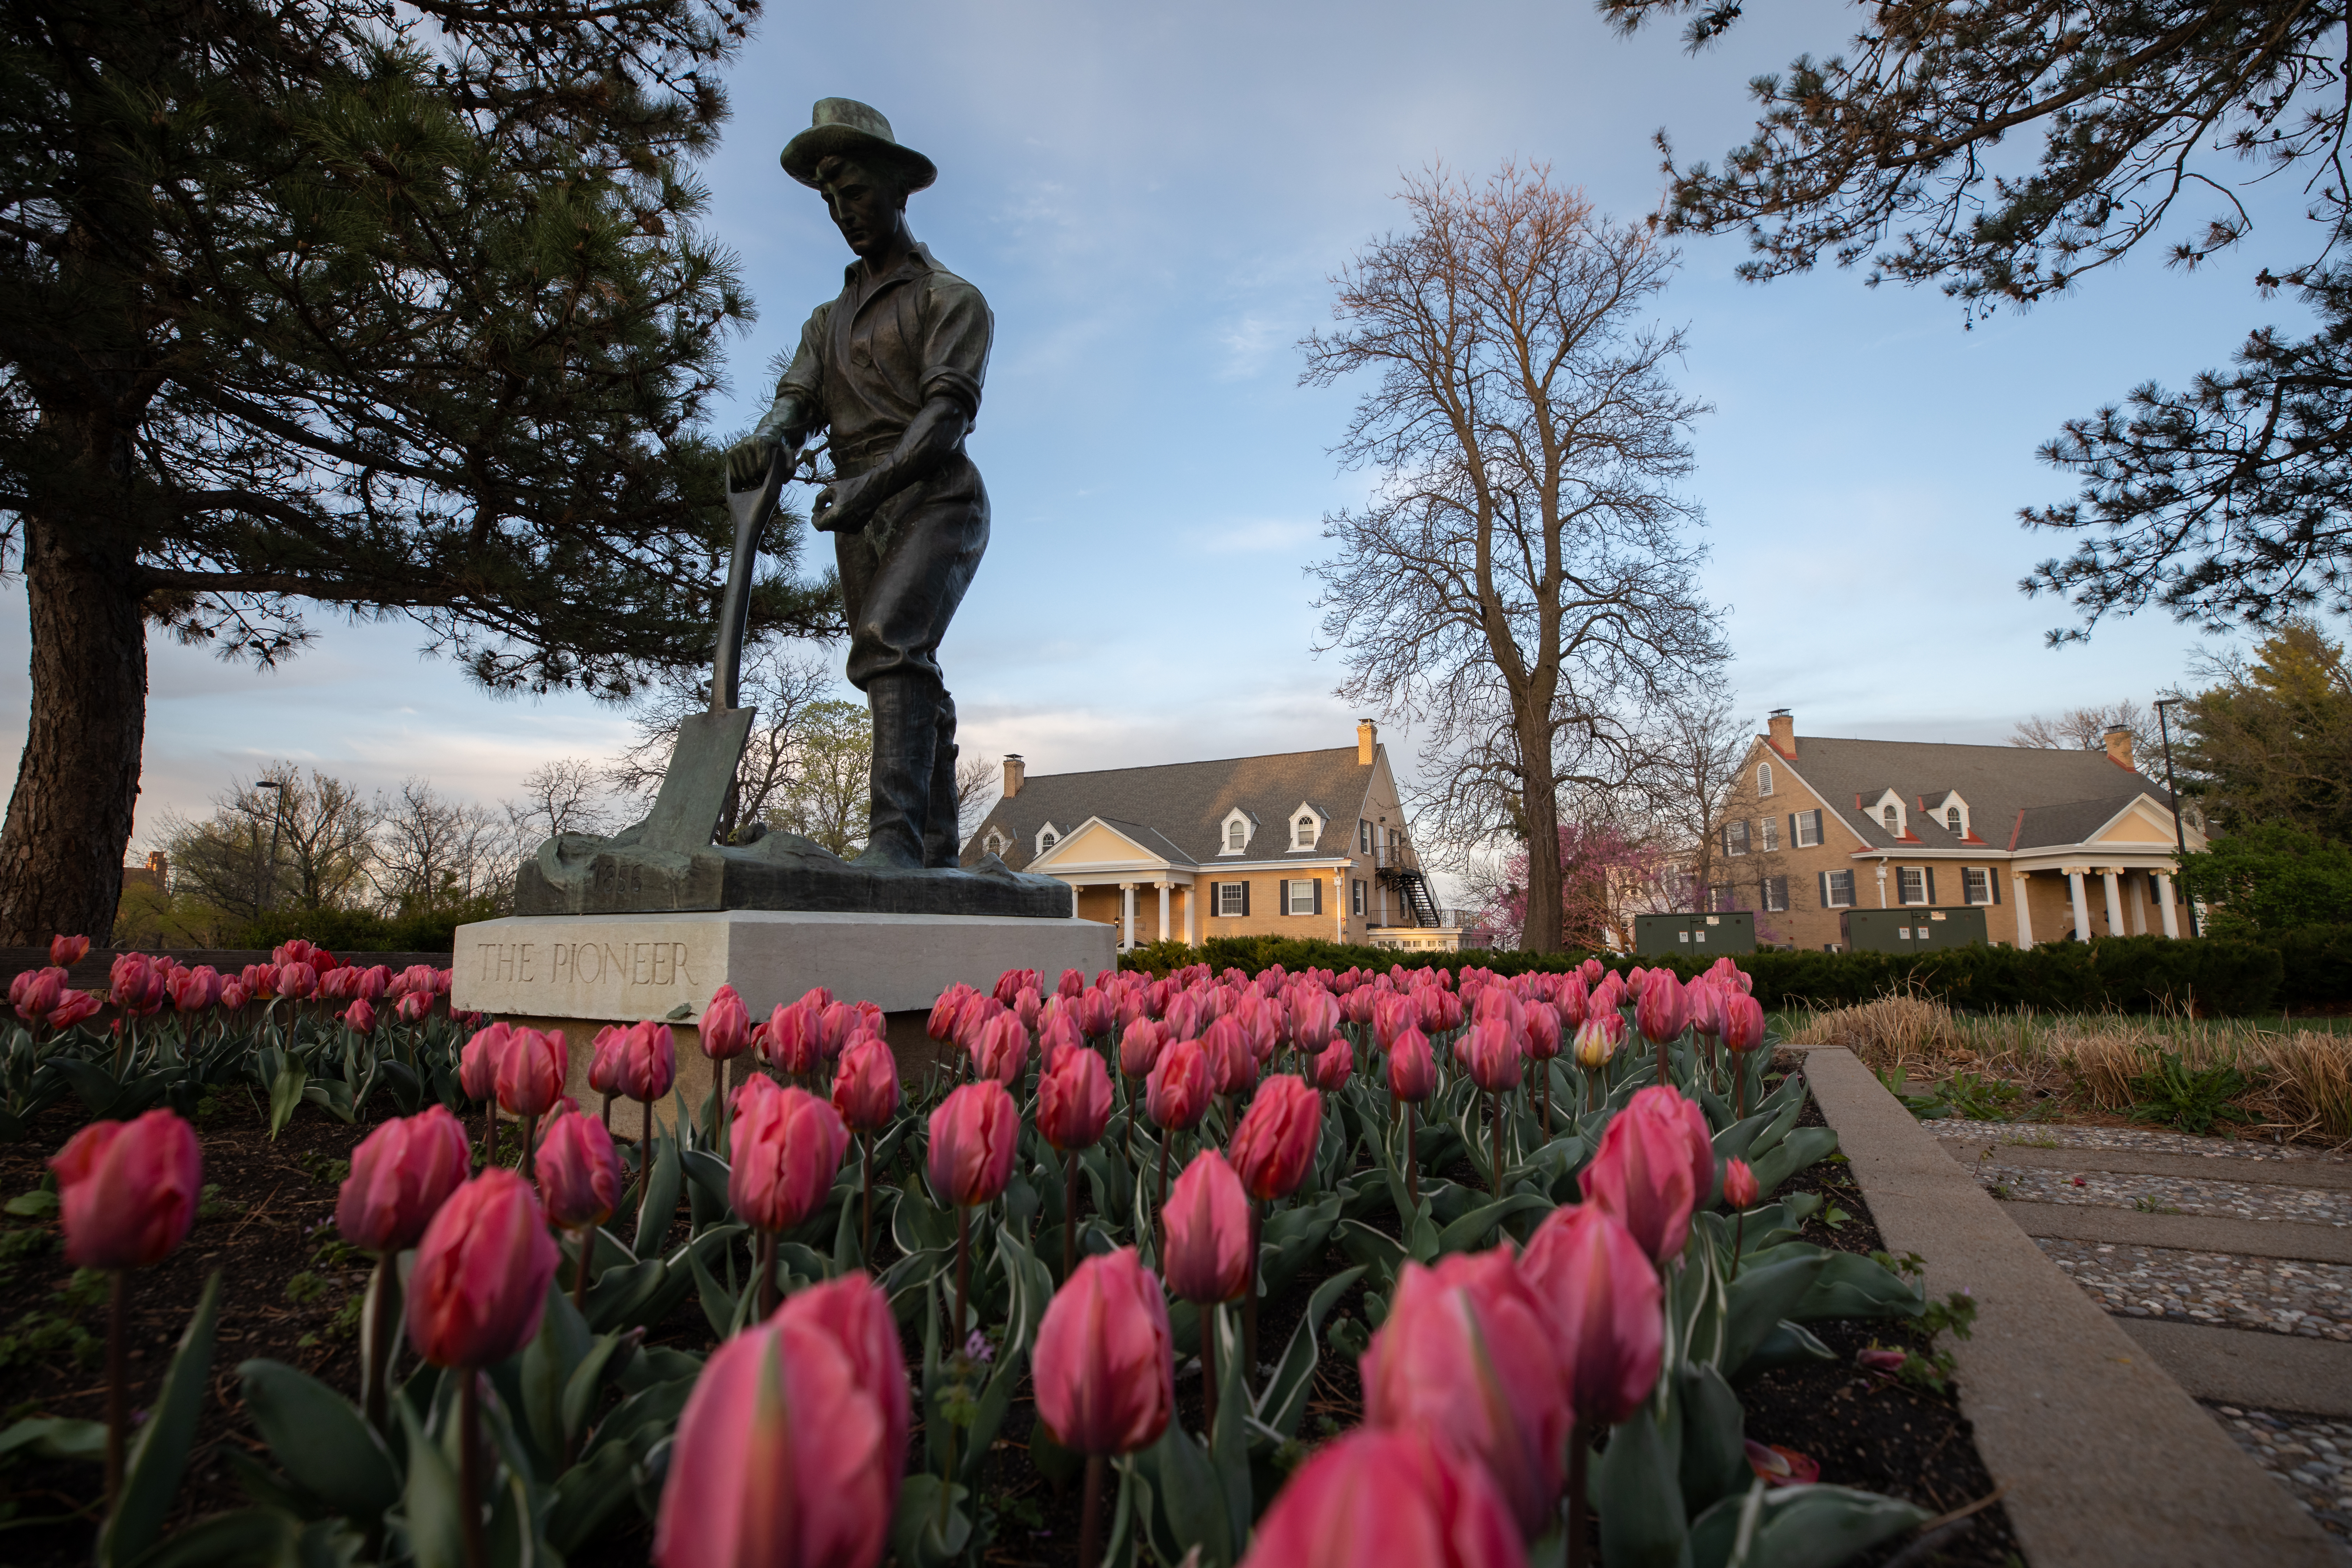 The Pioneer statue, surrounded by red tulips